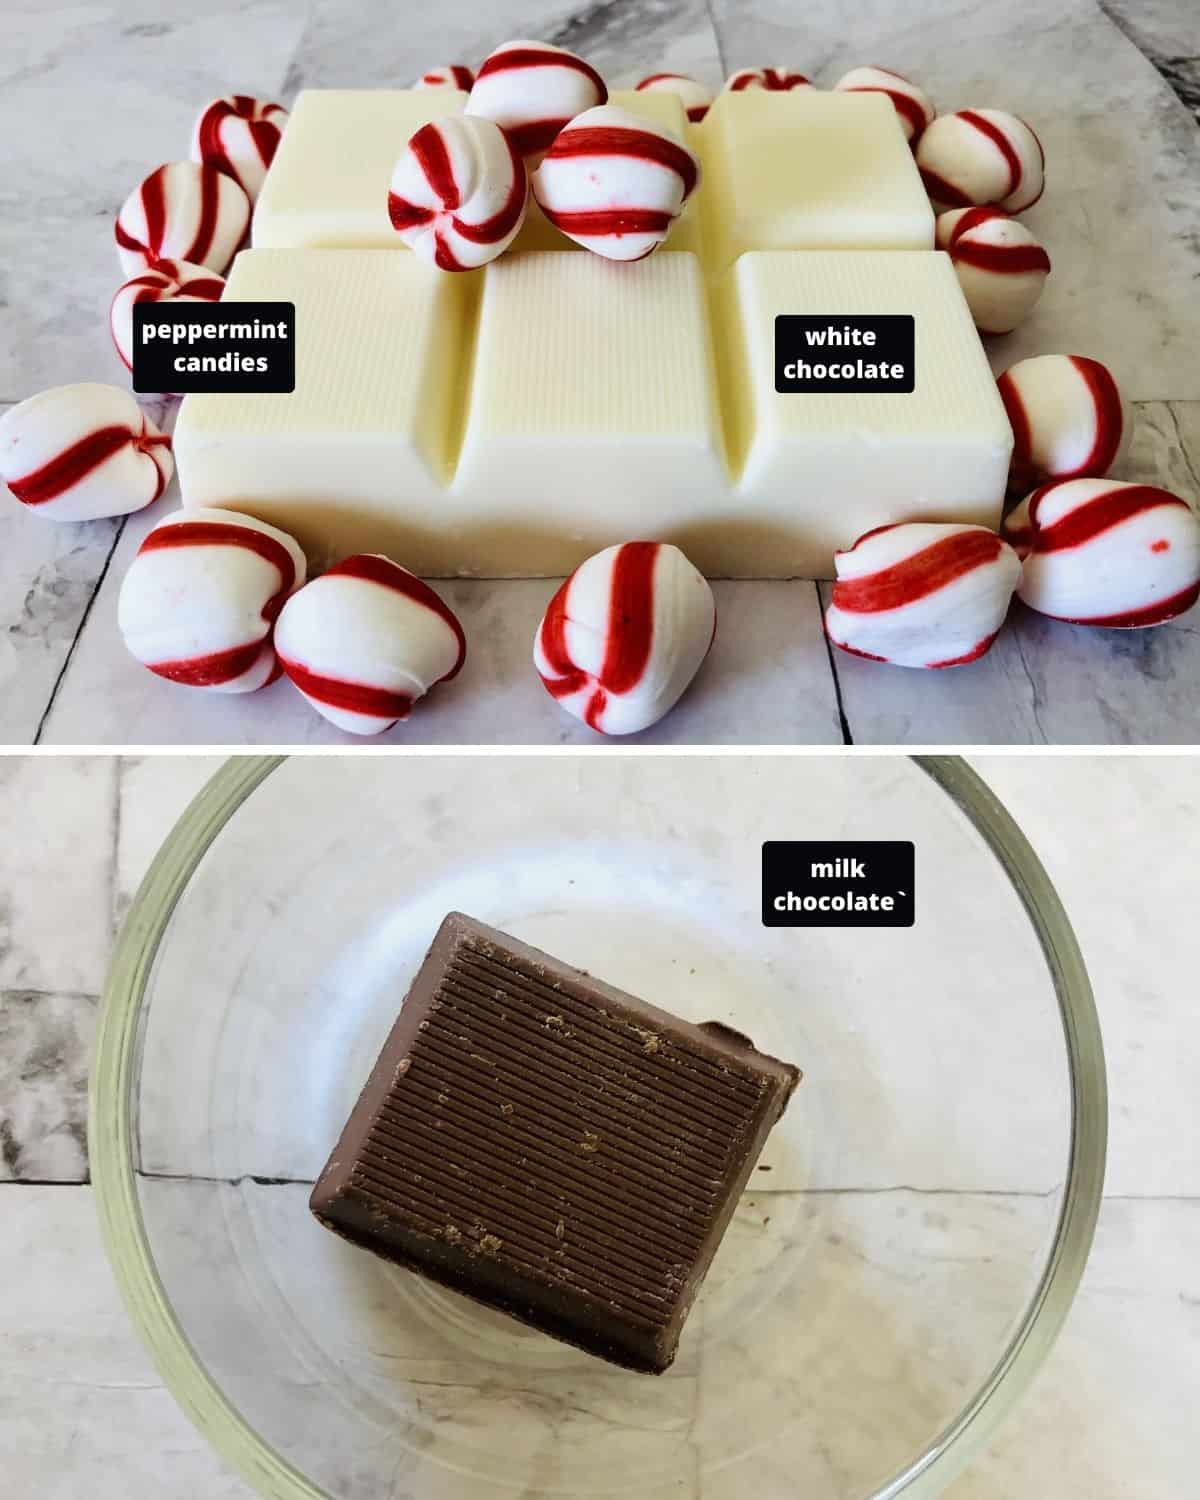 White chocolate blocks, soft peppermint candies and milk chocolate